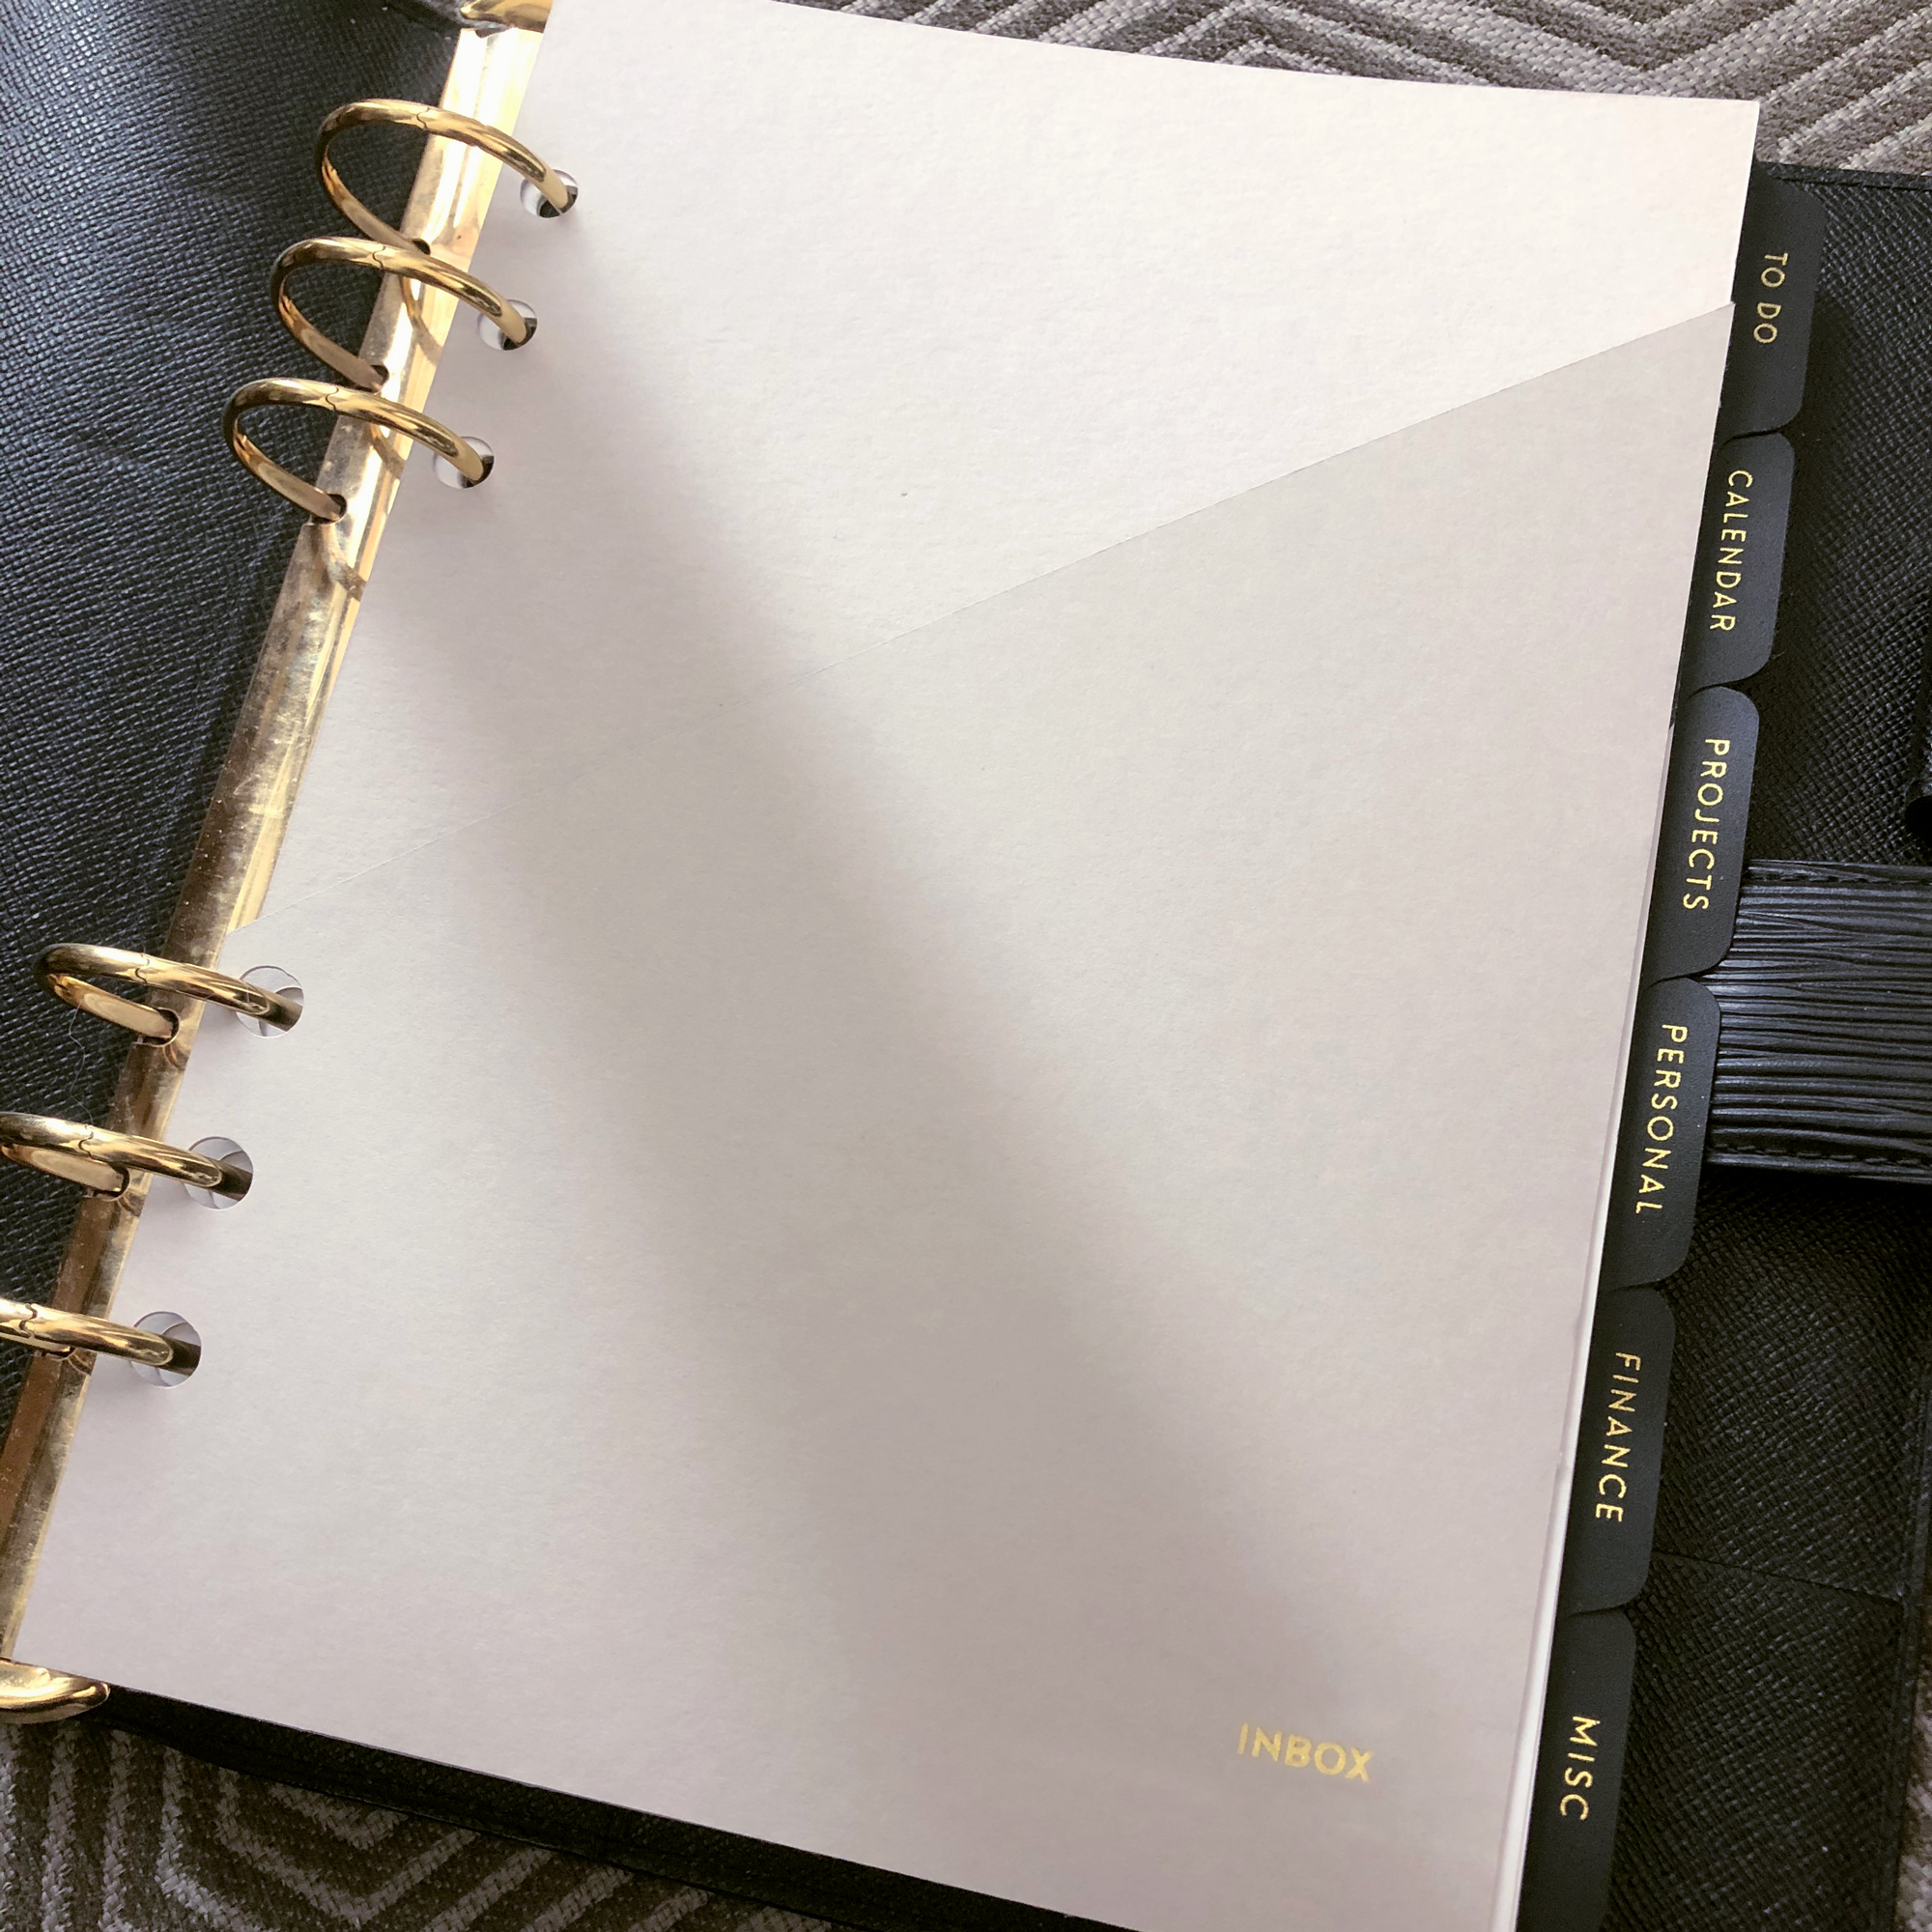 Louis Vuitton MM Notes Inserts - Gold or Rose Gold Foiled